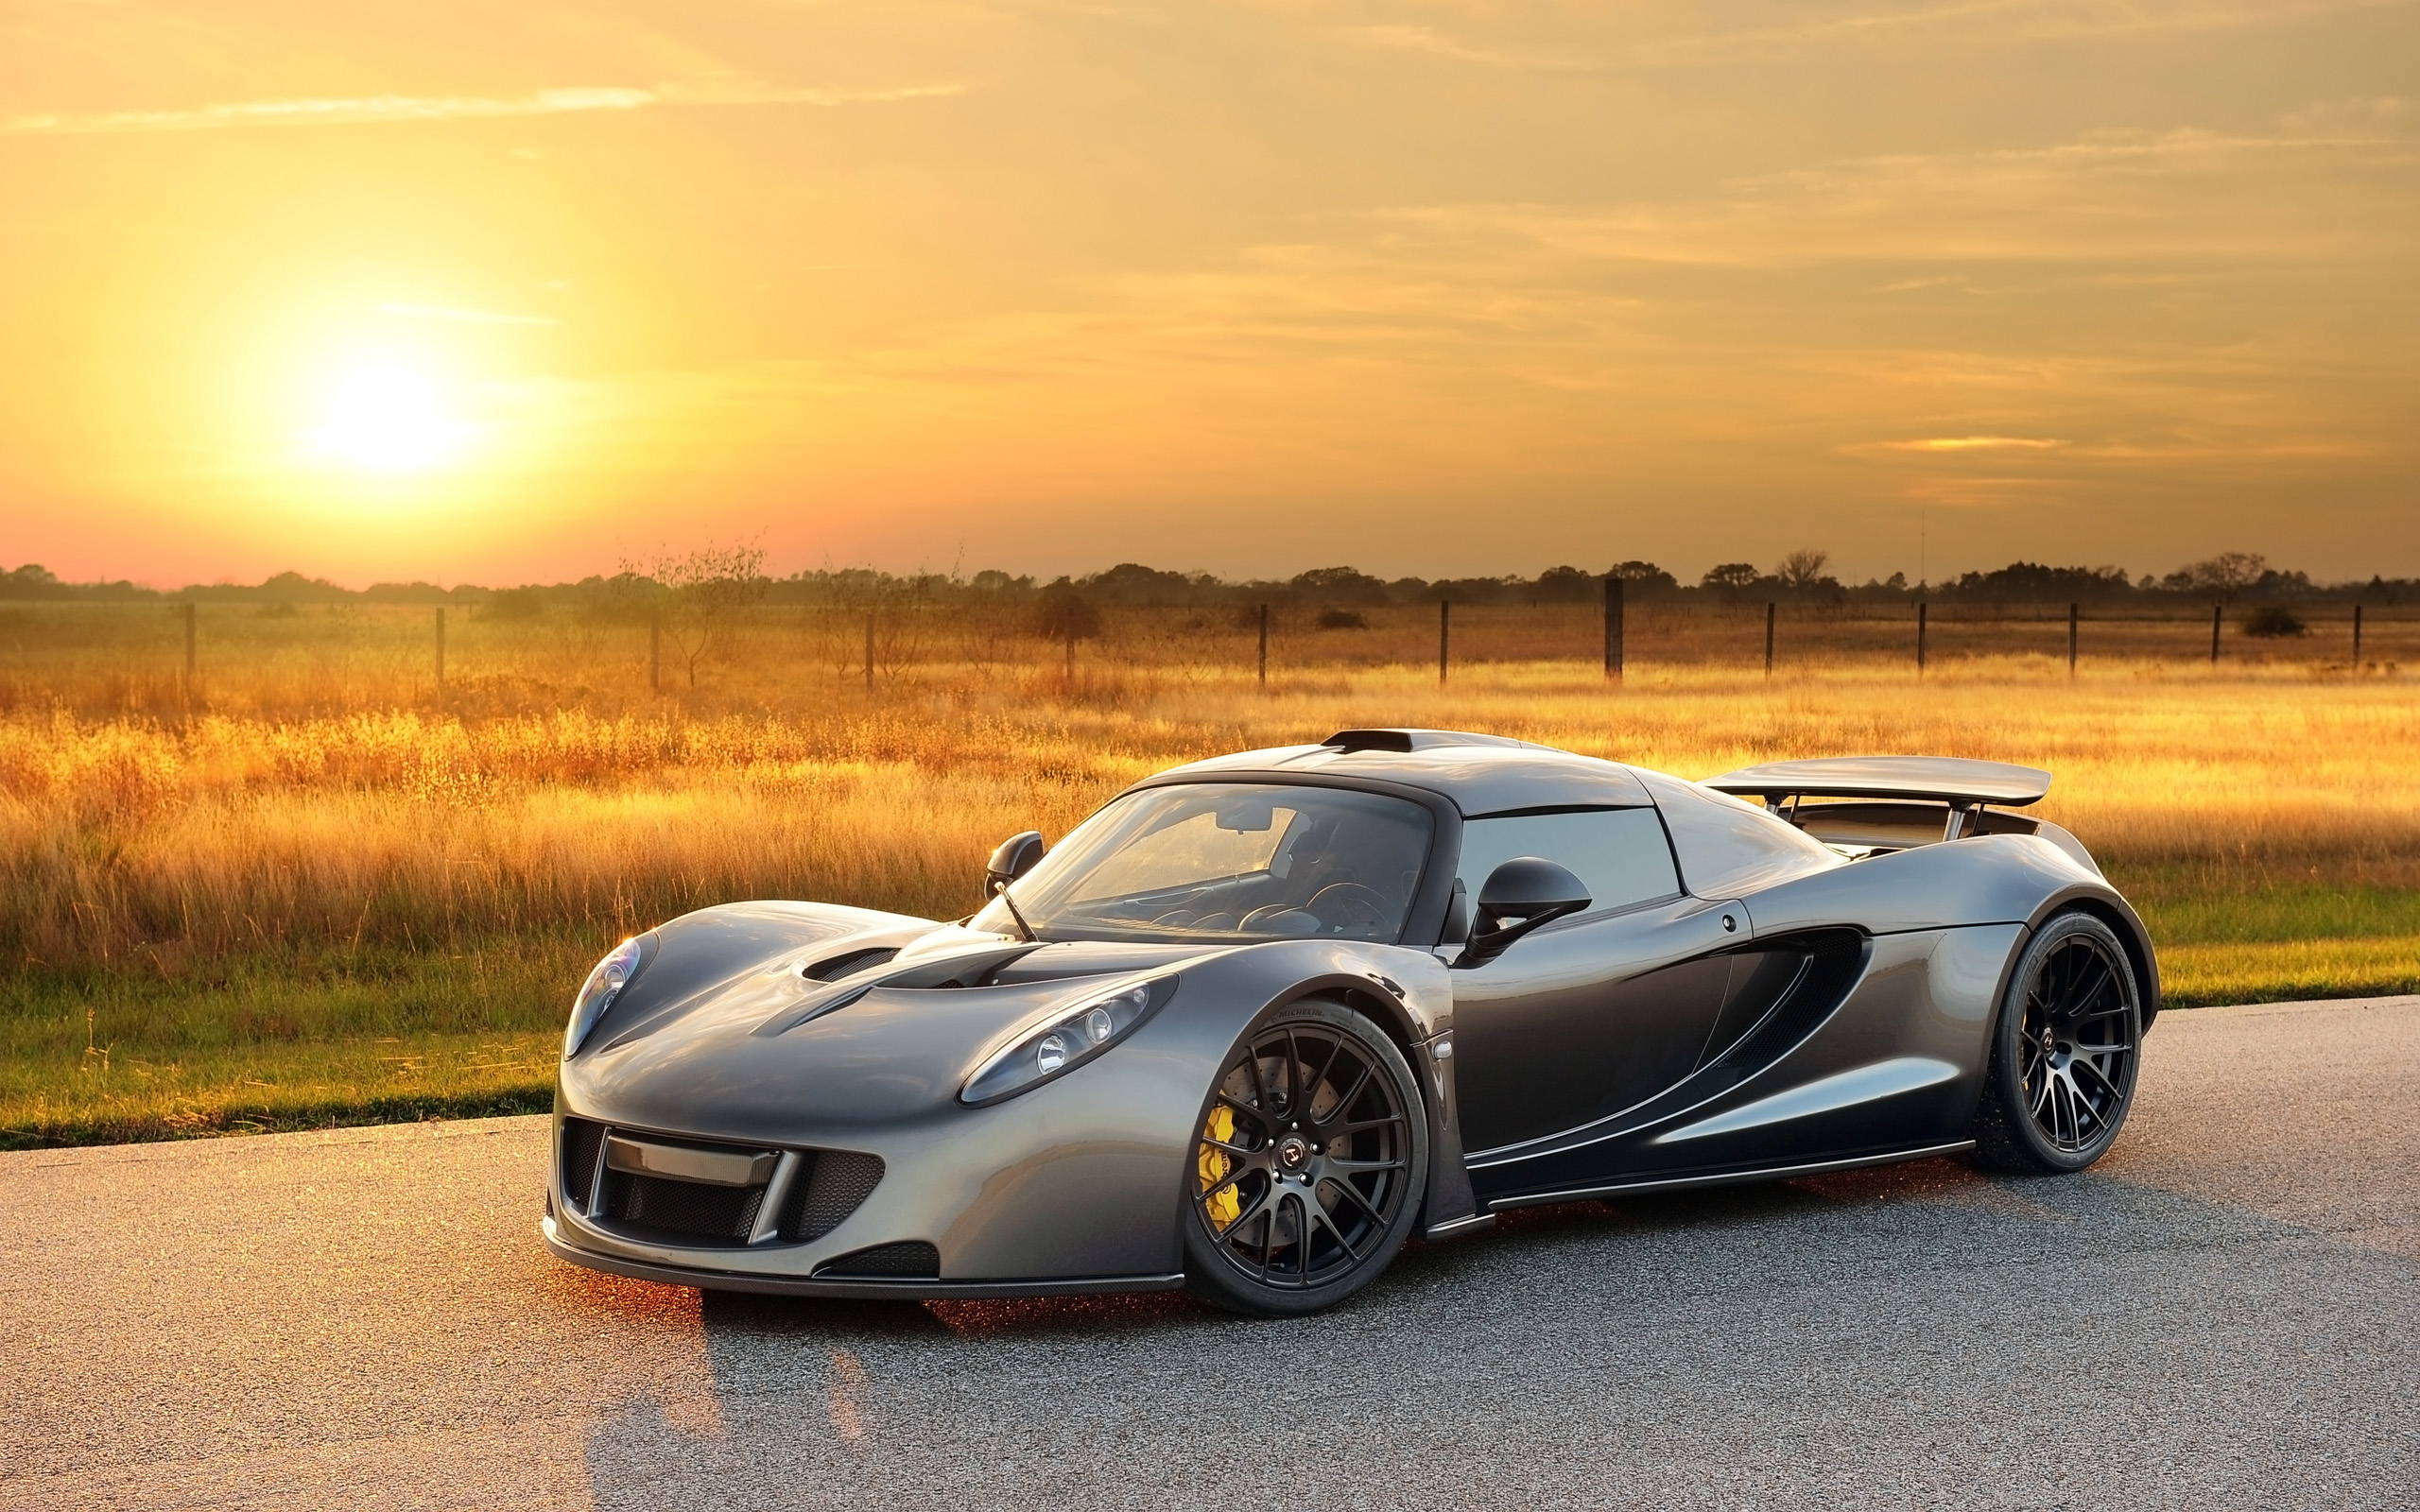 New Lock Screen Wallpapers vehicles, hennessey venom gt, car, hennessey, silver car, supercar